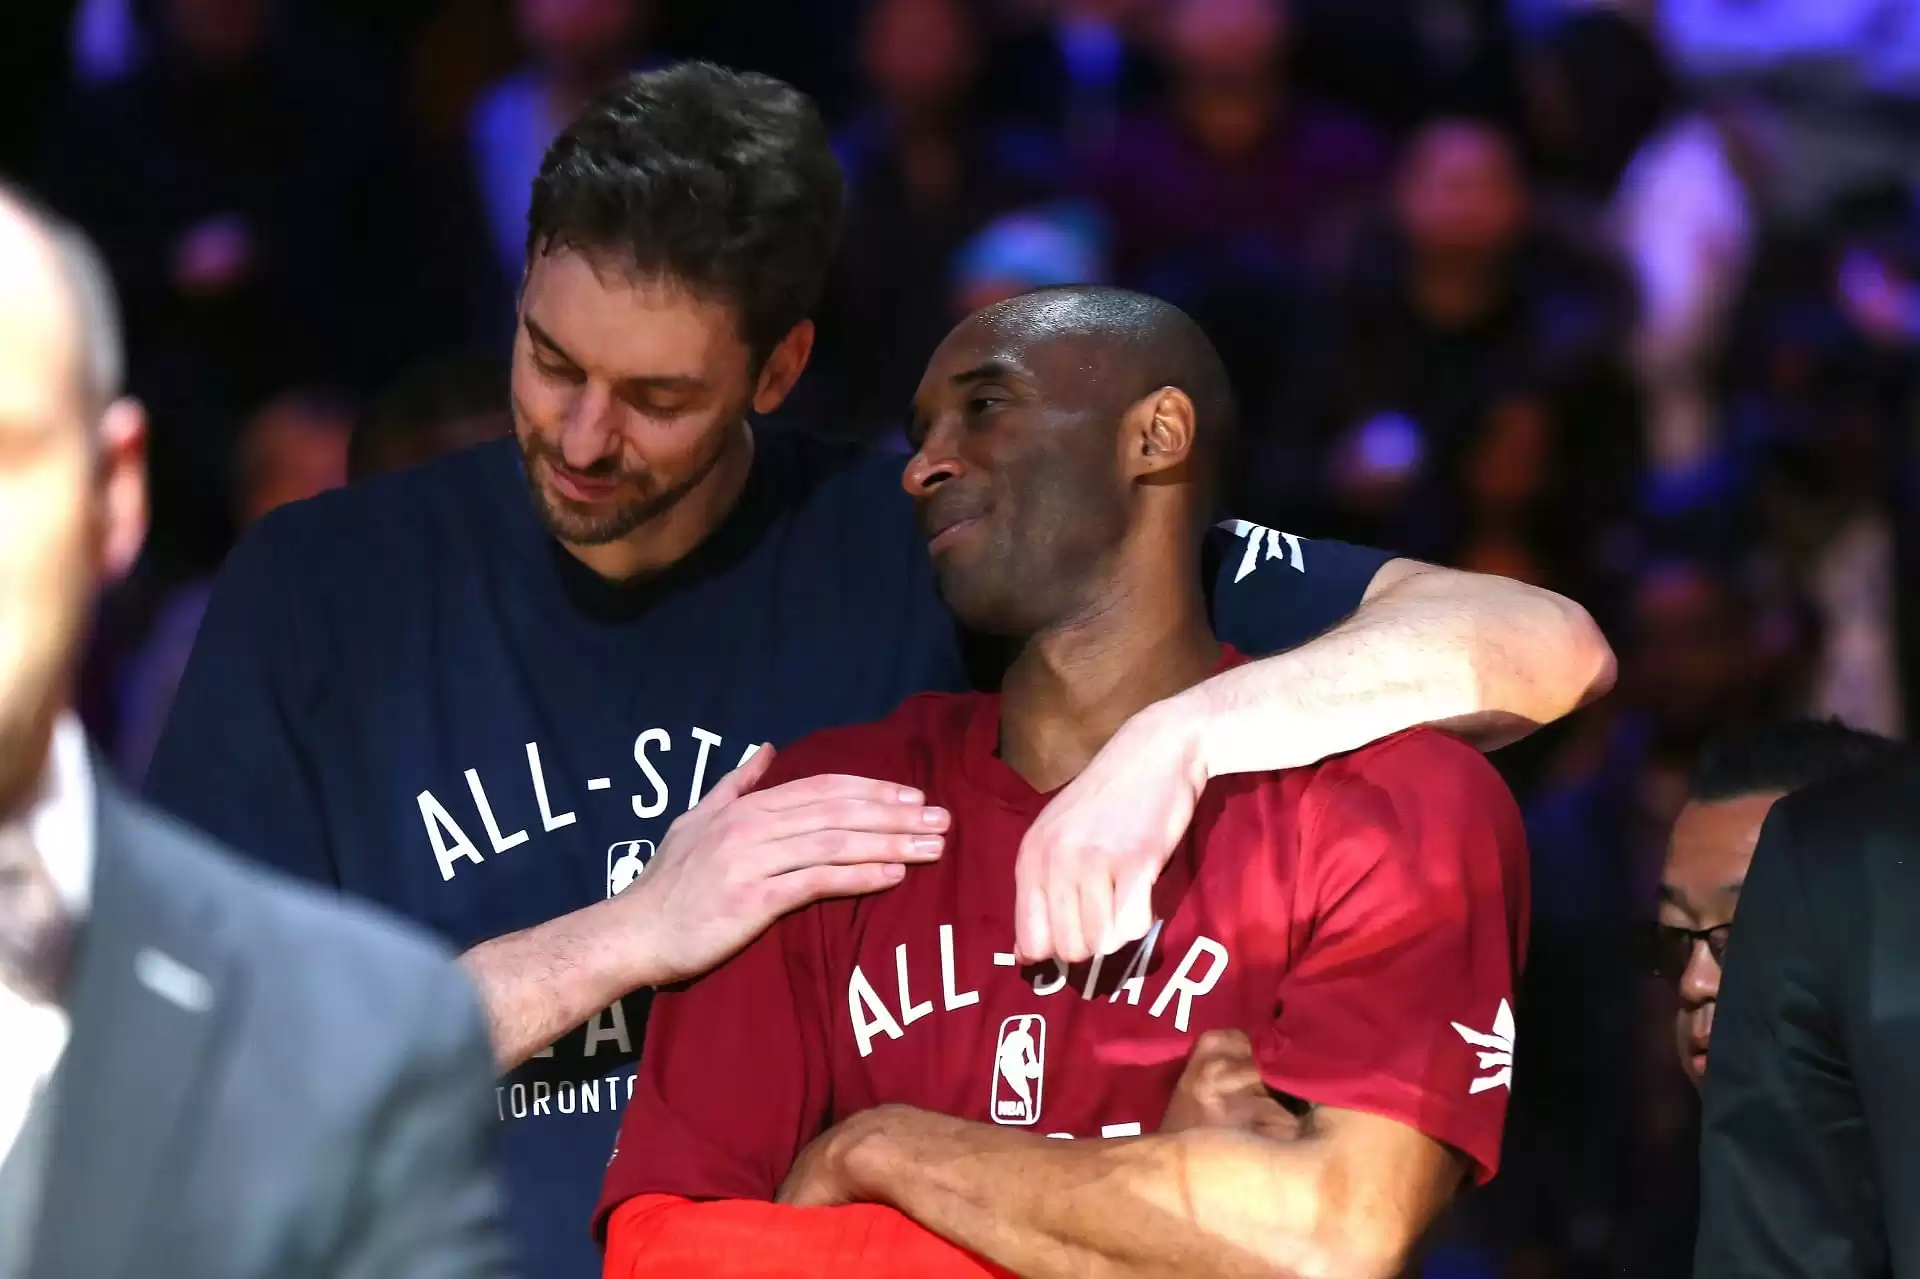 Pau Gasol recalls Kobe Bryant's Lakers welcome message for championship success